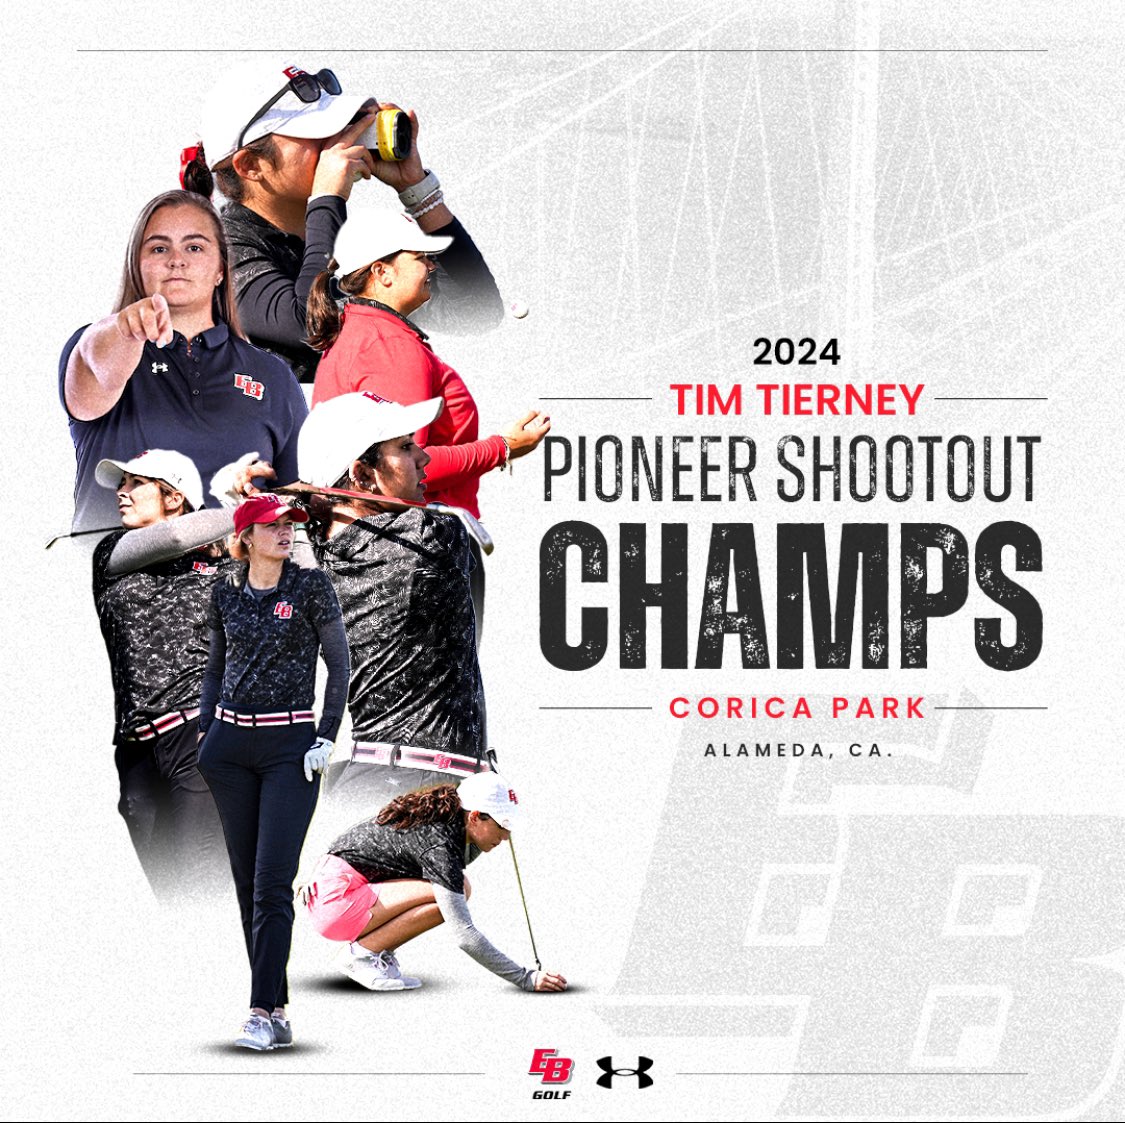 🏆: CHAMPS. Congratulations to Women’s Golf for capturing First Place at the 2024 Tim Tierney Pioneer Shootout. #BuildTheBrand